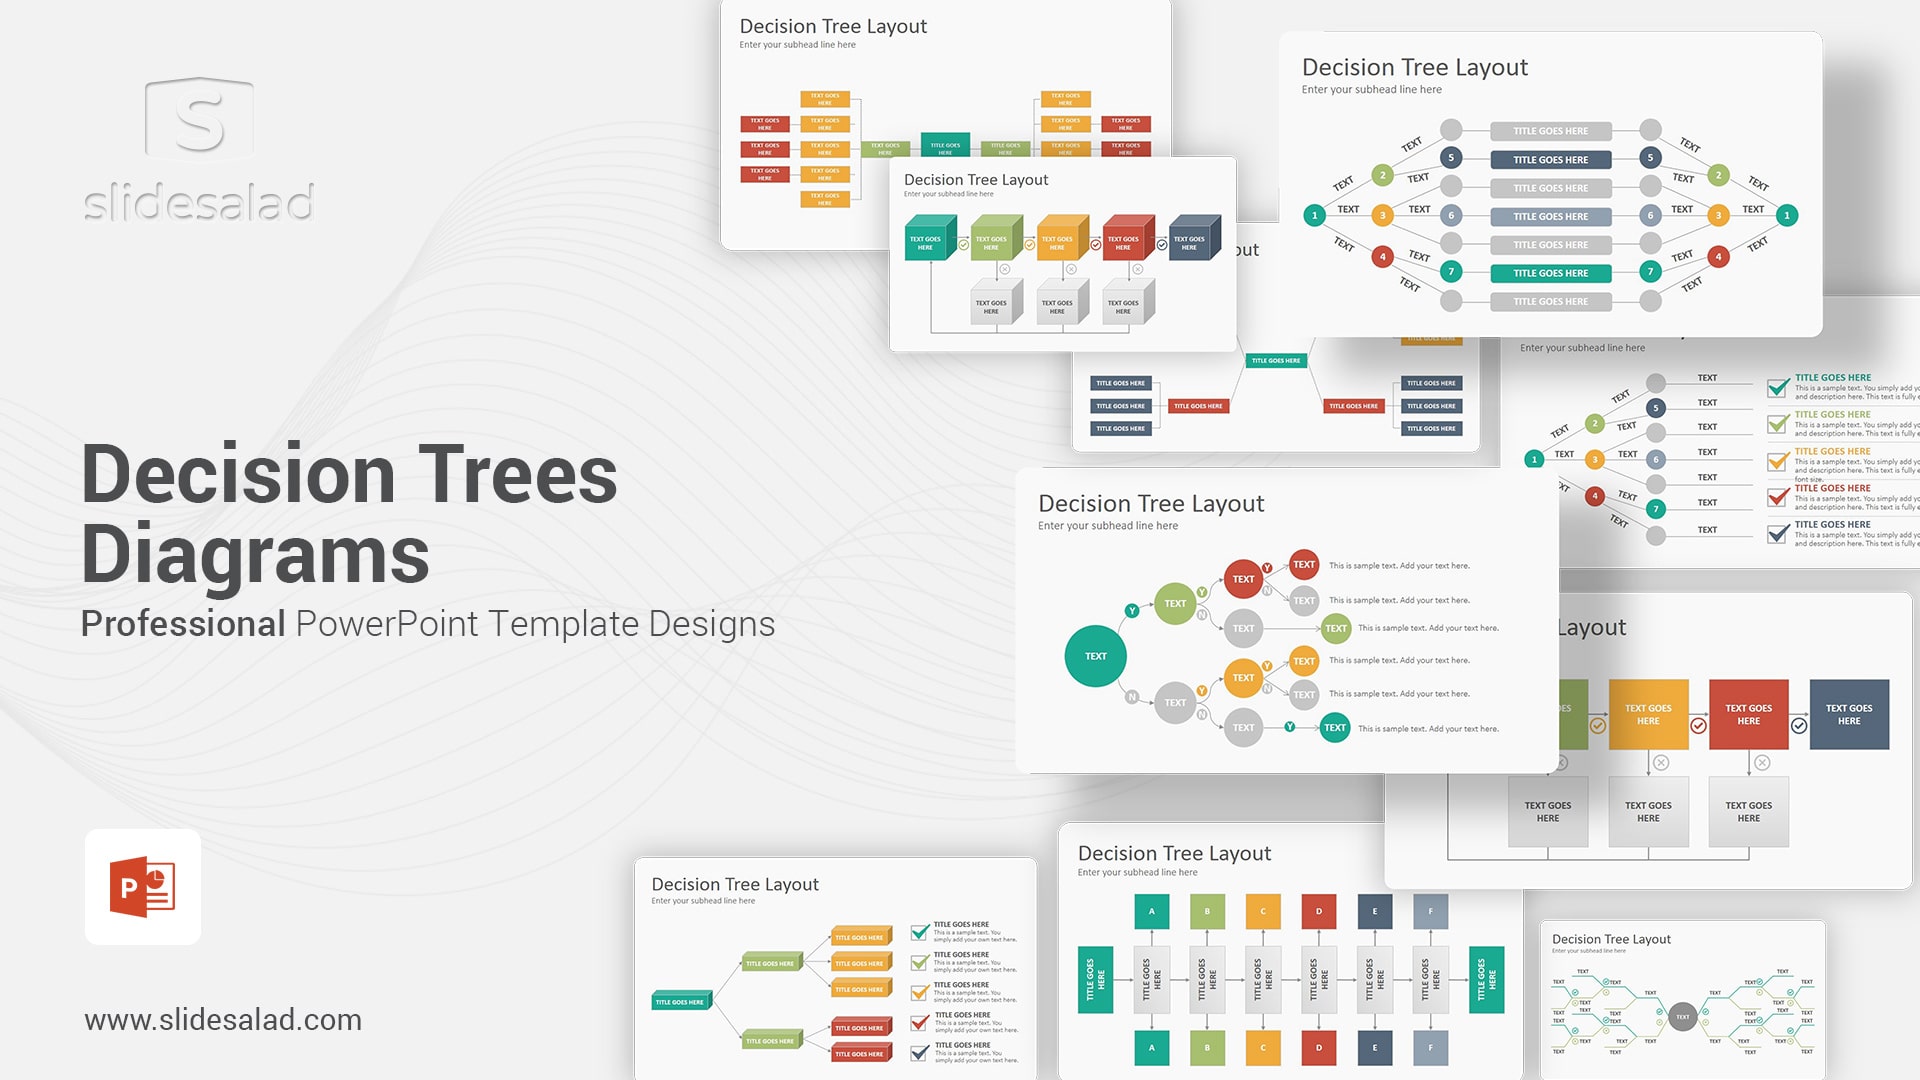 Decision Trees Diagrams PowerPoint Presentation Template - The Most Influential and Widespread Tool for Classification and Forecast in Decision Making